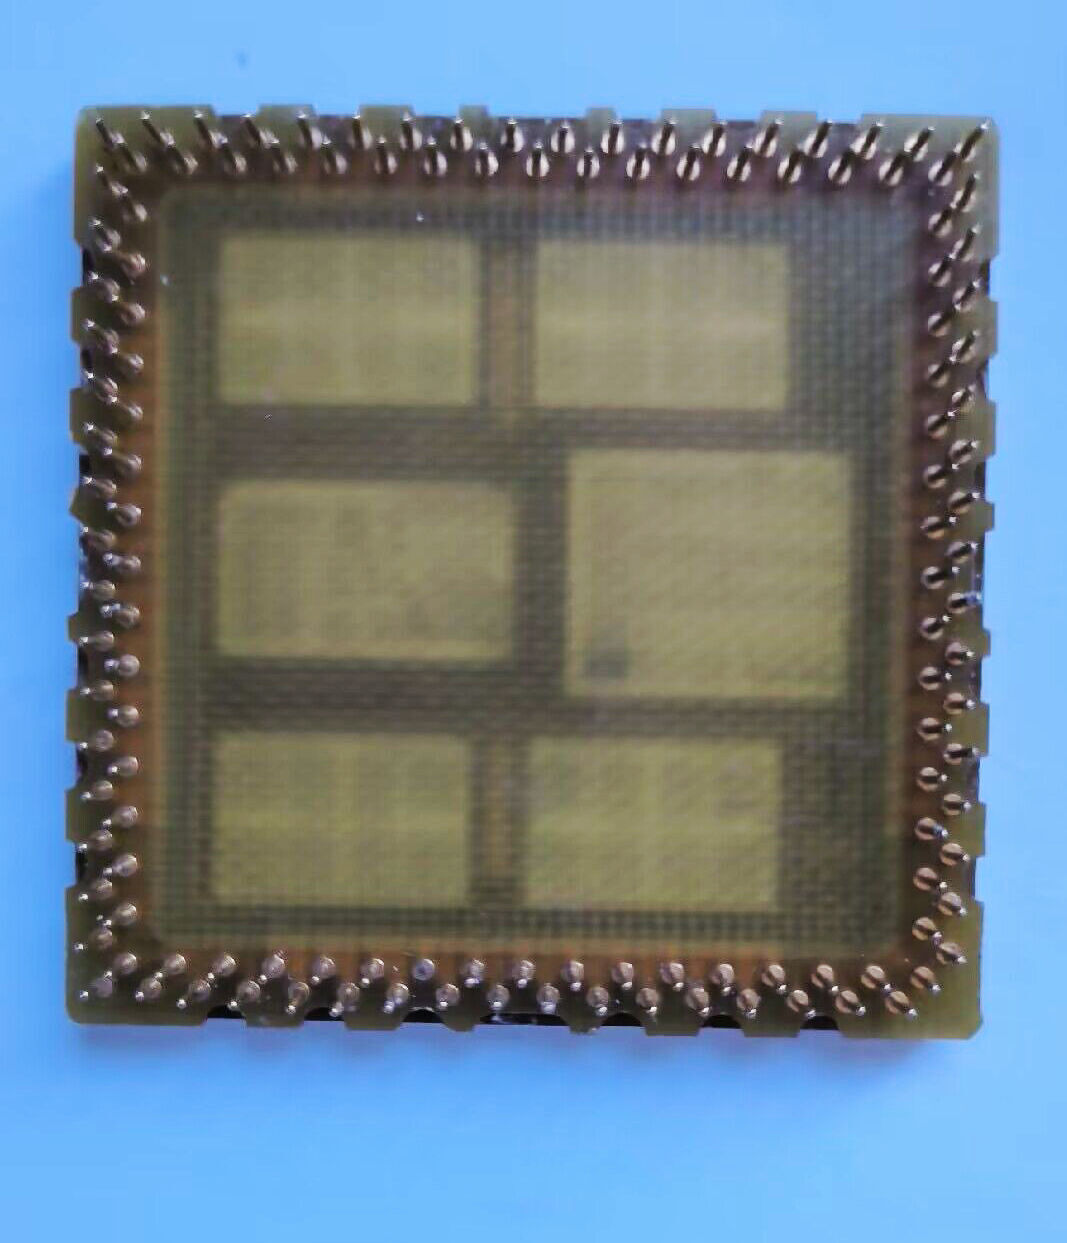 Old gold-plated CPUs. early Intel CPUs, largely extinct, missing a pin